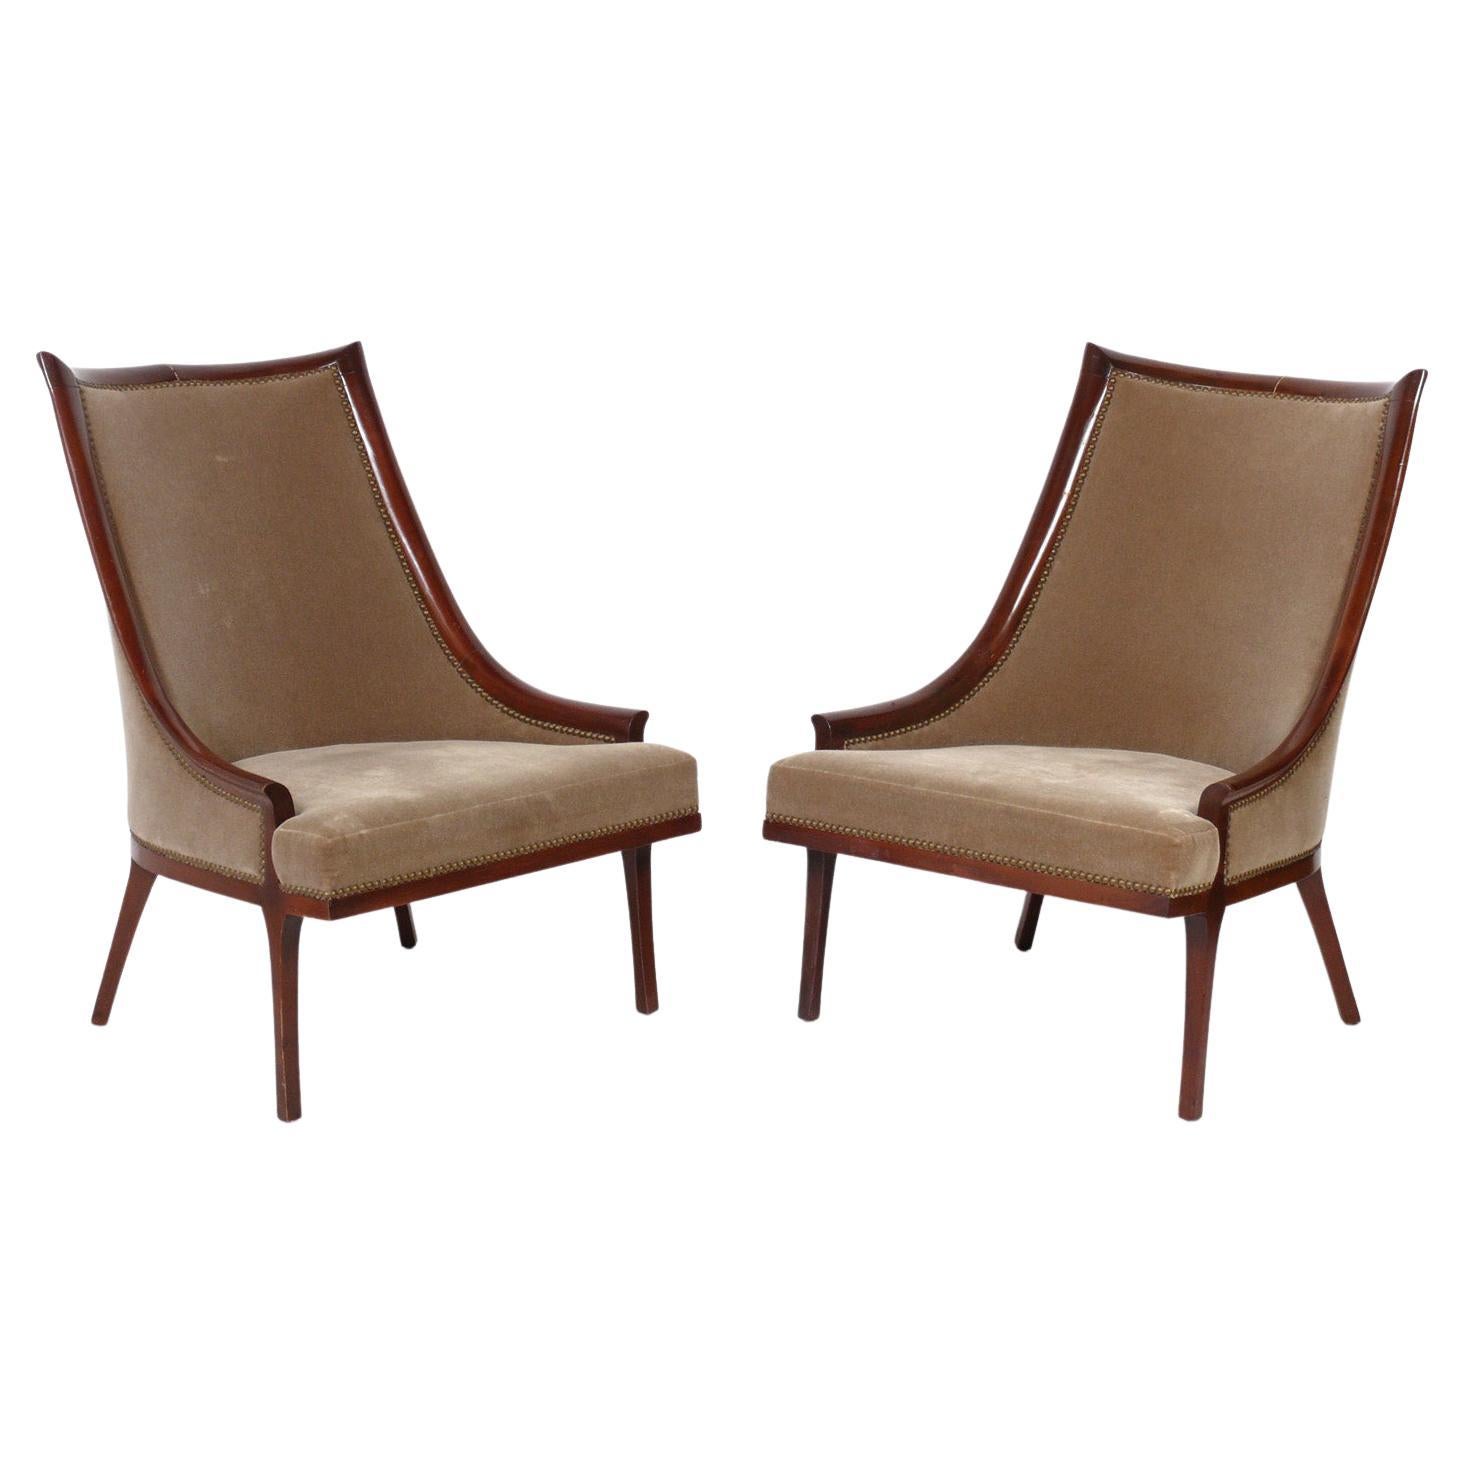 Pair of French Lounge Chairs